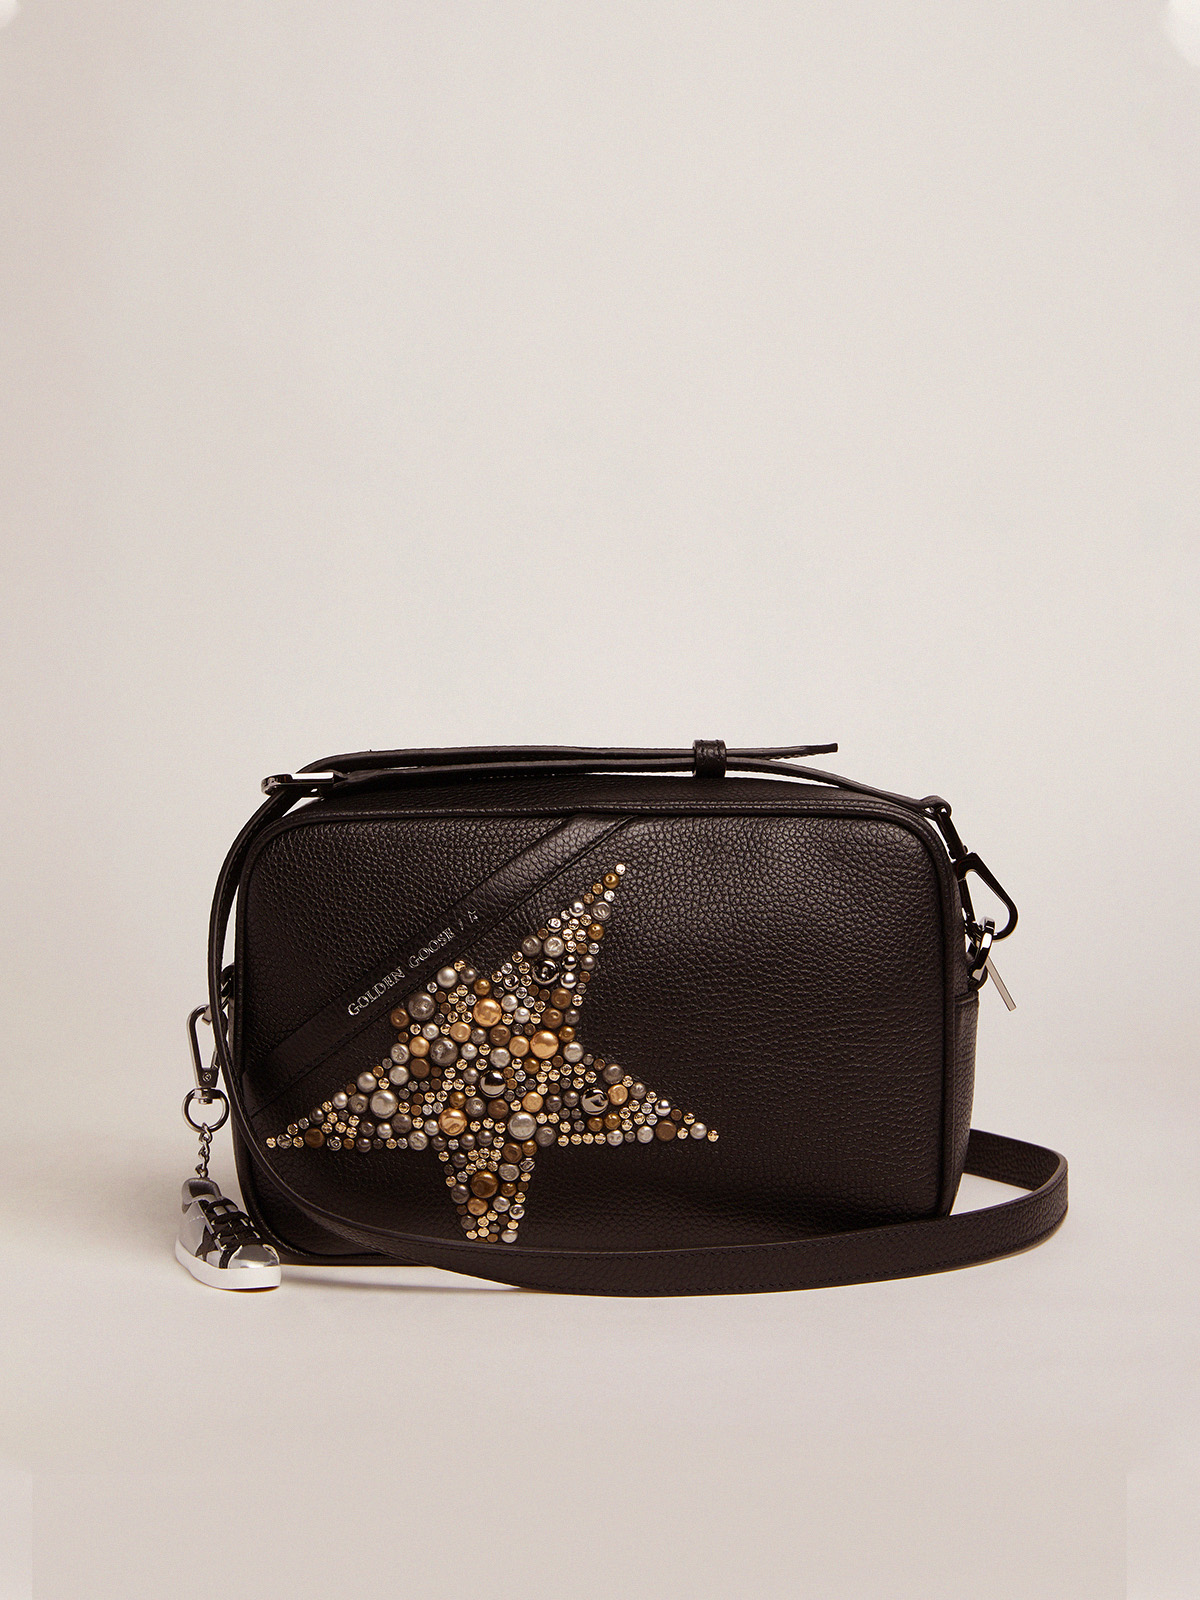 Nude Star Bag made of hammered leather with love-themed designs